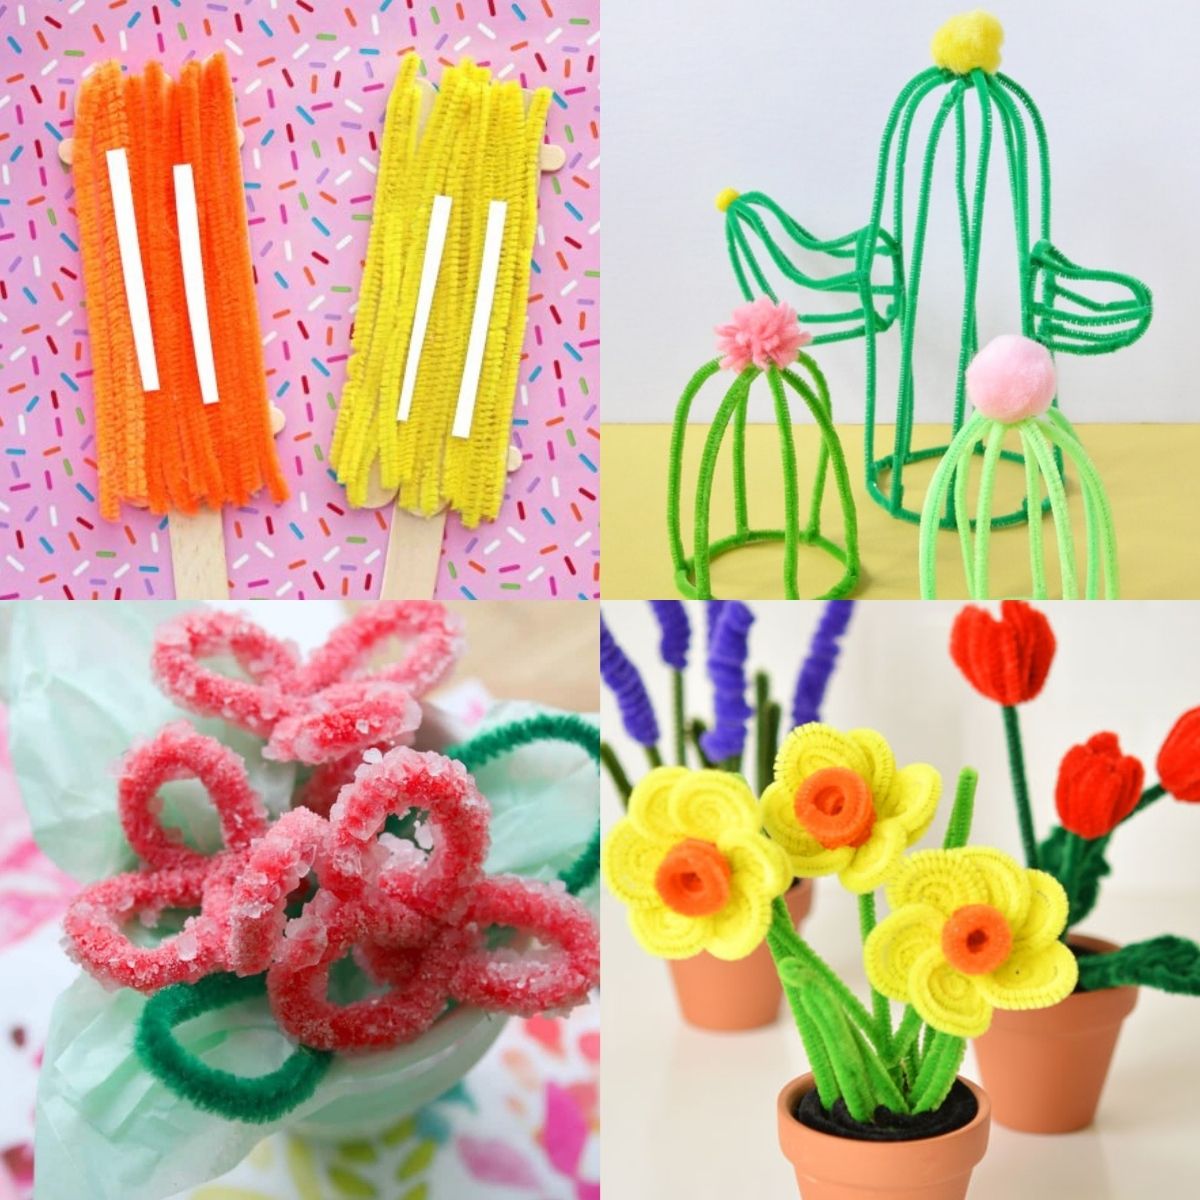 27 Pipe Cleaner Craft Ideas That Are Super Fun - Craftsy Hacks